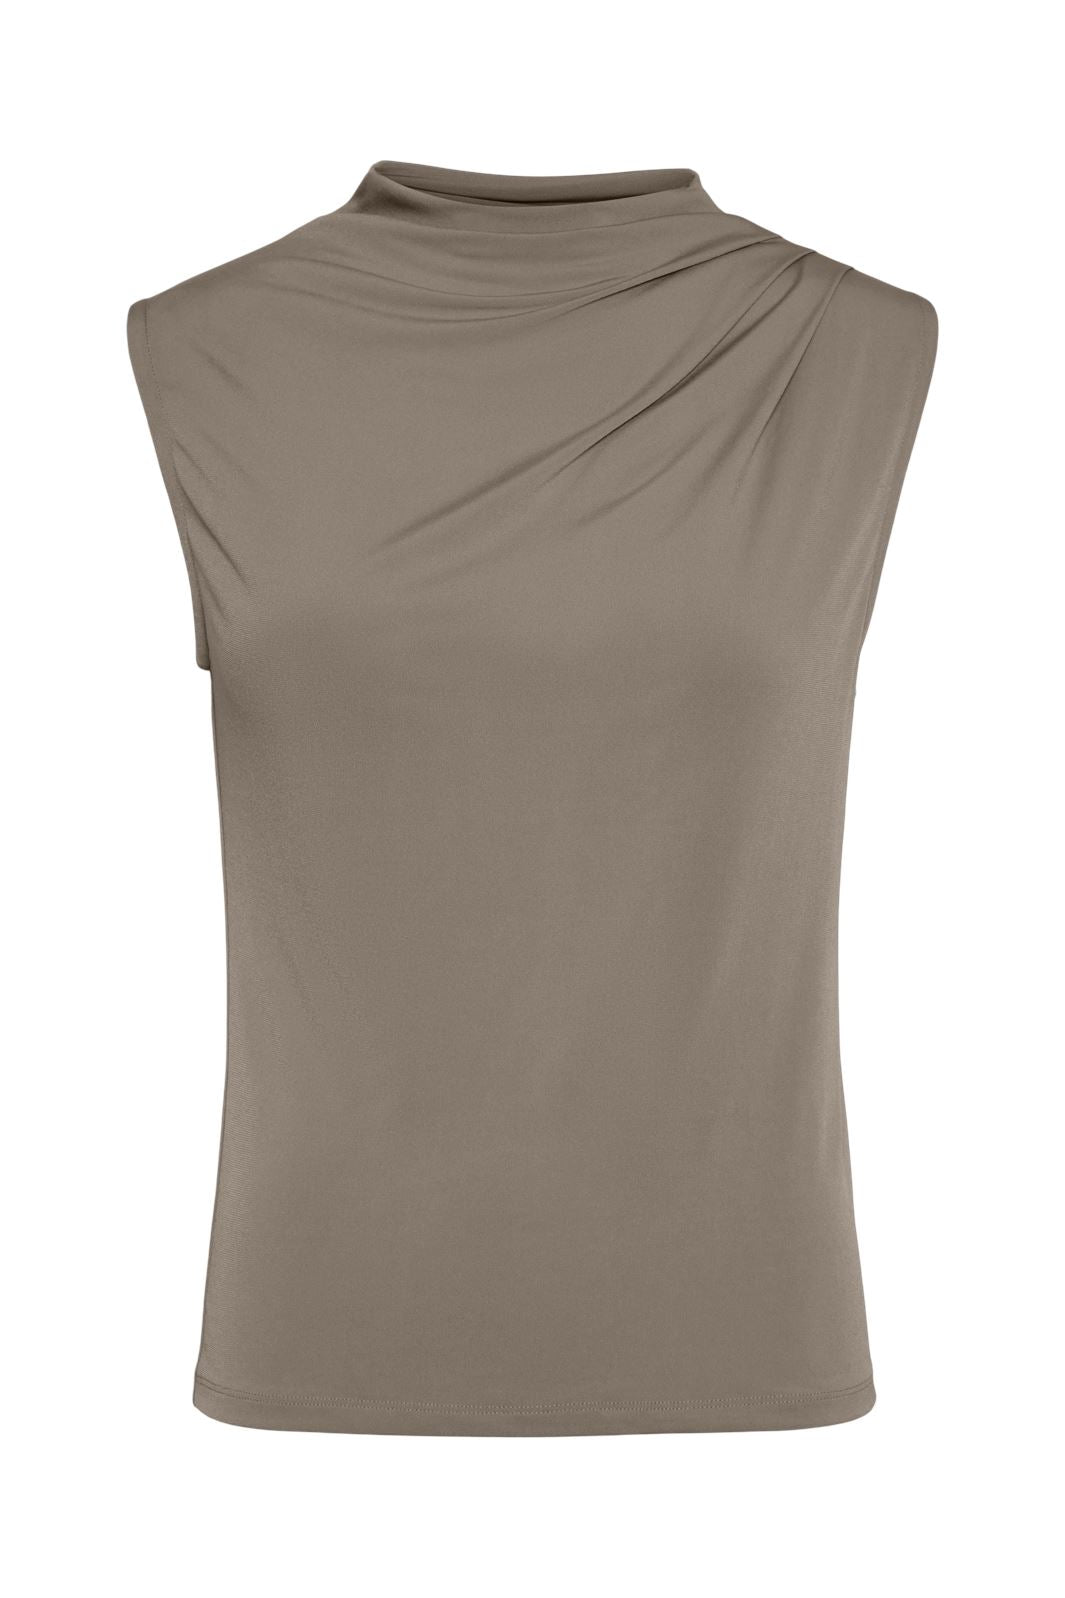 Pieces - Pcmadison Sl Draped Top - 4614801 Taupe Gray